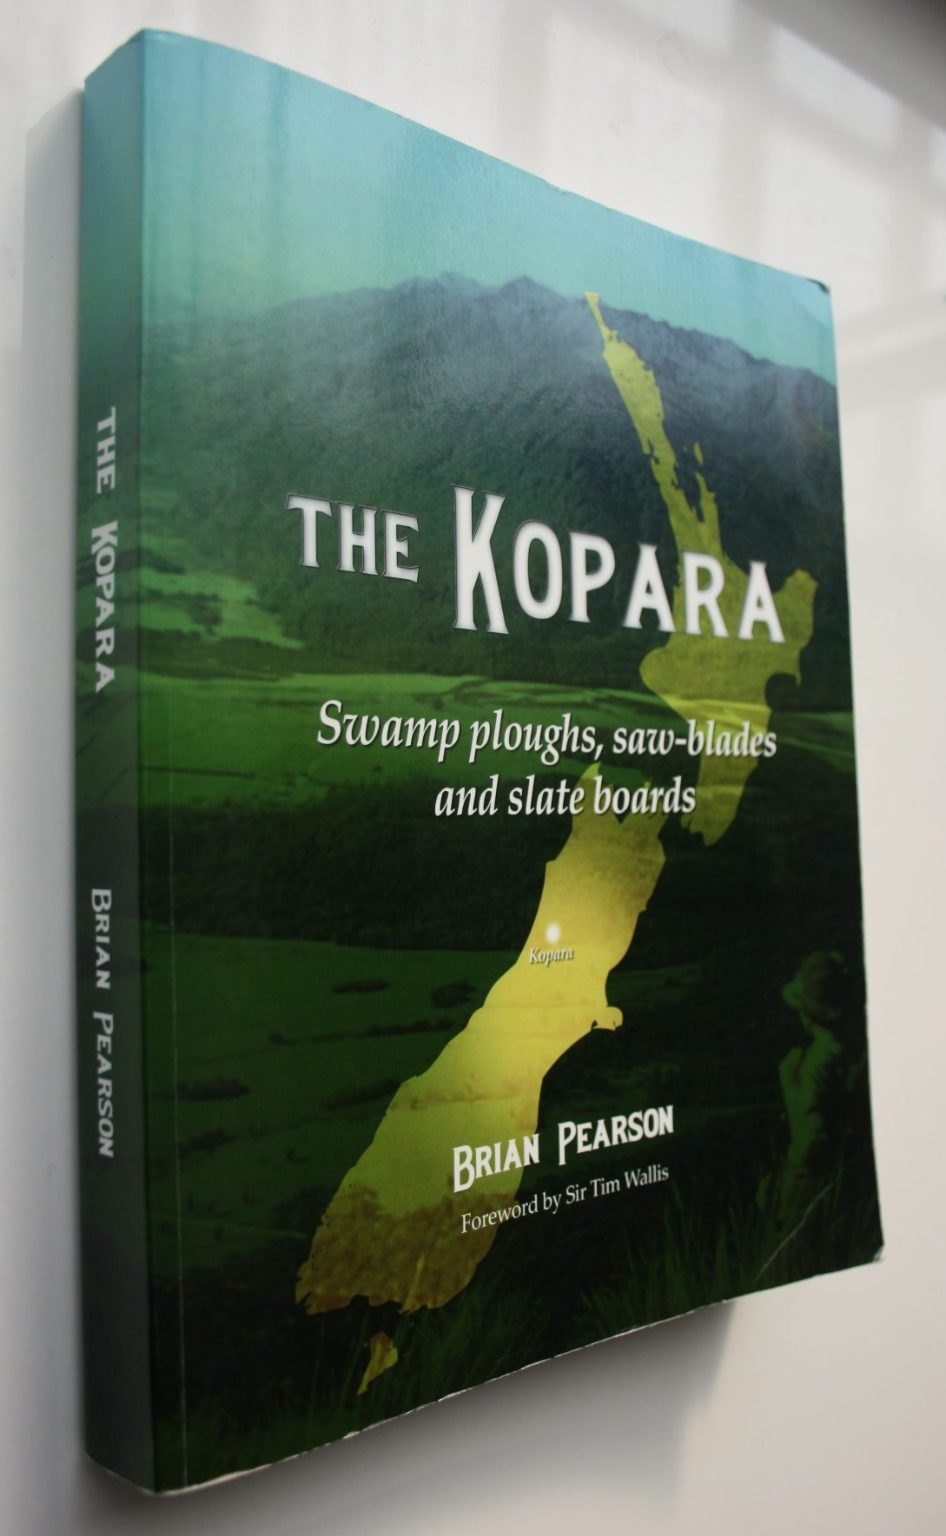 The Kopara Swamp Ploughs, Saw-blades and Slate Boards By Brian Pearson. 2007, FIRST EDITION.